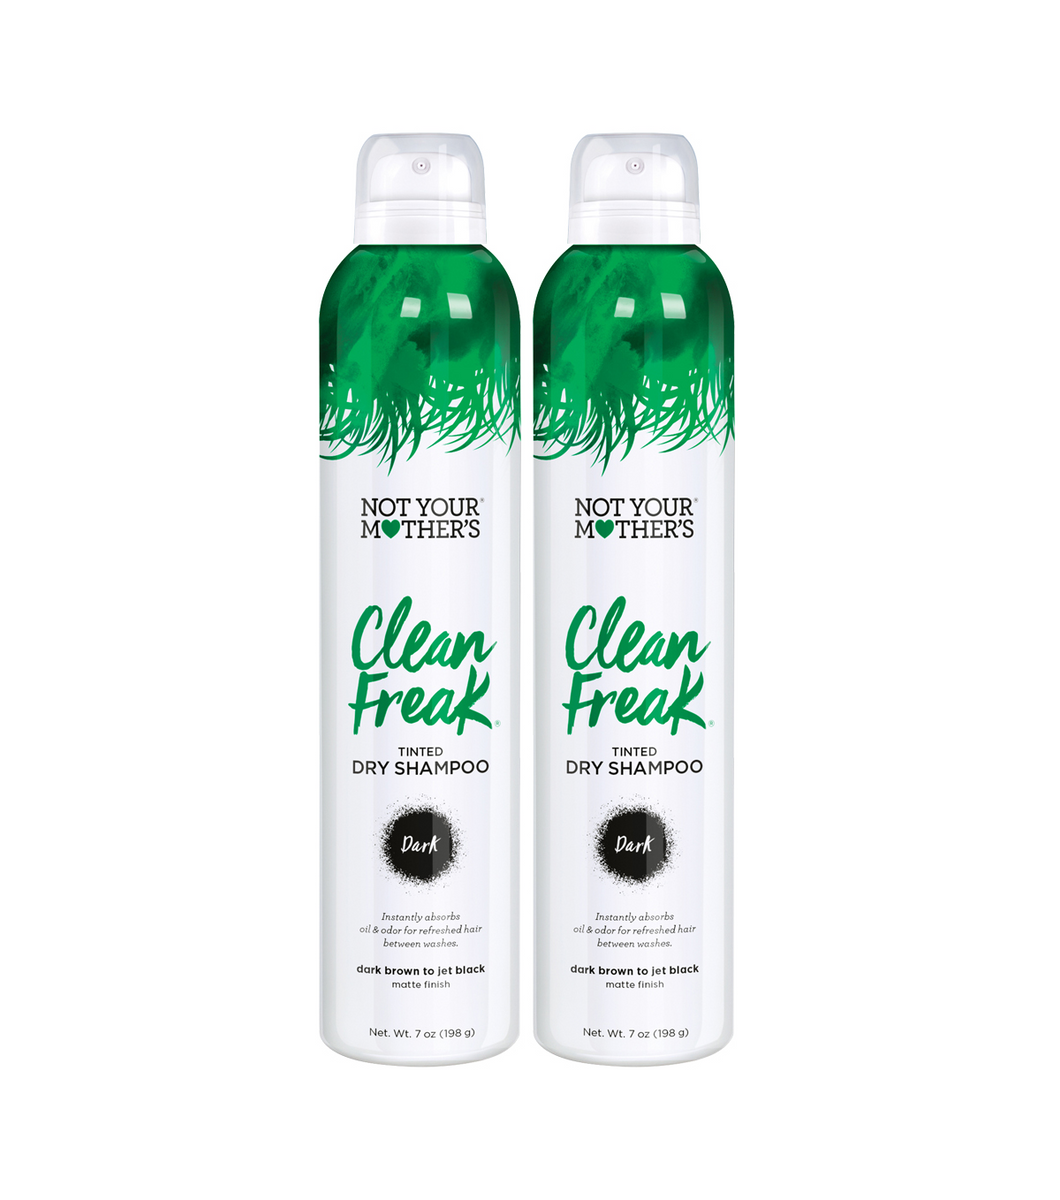 Not Your Mother's Clean Freak Original Dry Shampoo (2-Pack) - 7 oz - Refreshing Dry Shampoo - Instantly Absorbs Oil and Odor for Refreshed Hair 7 Ounce (Pack of 2)